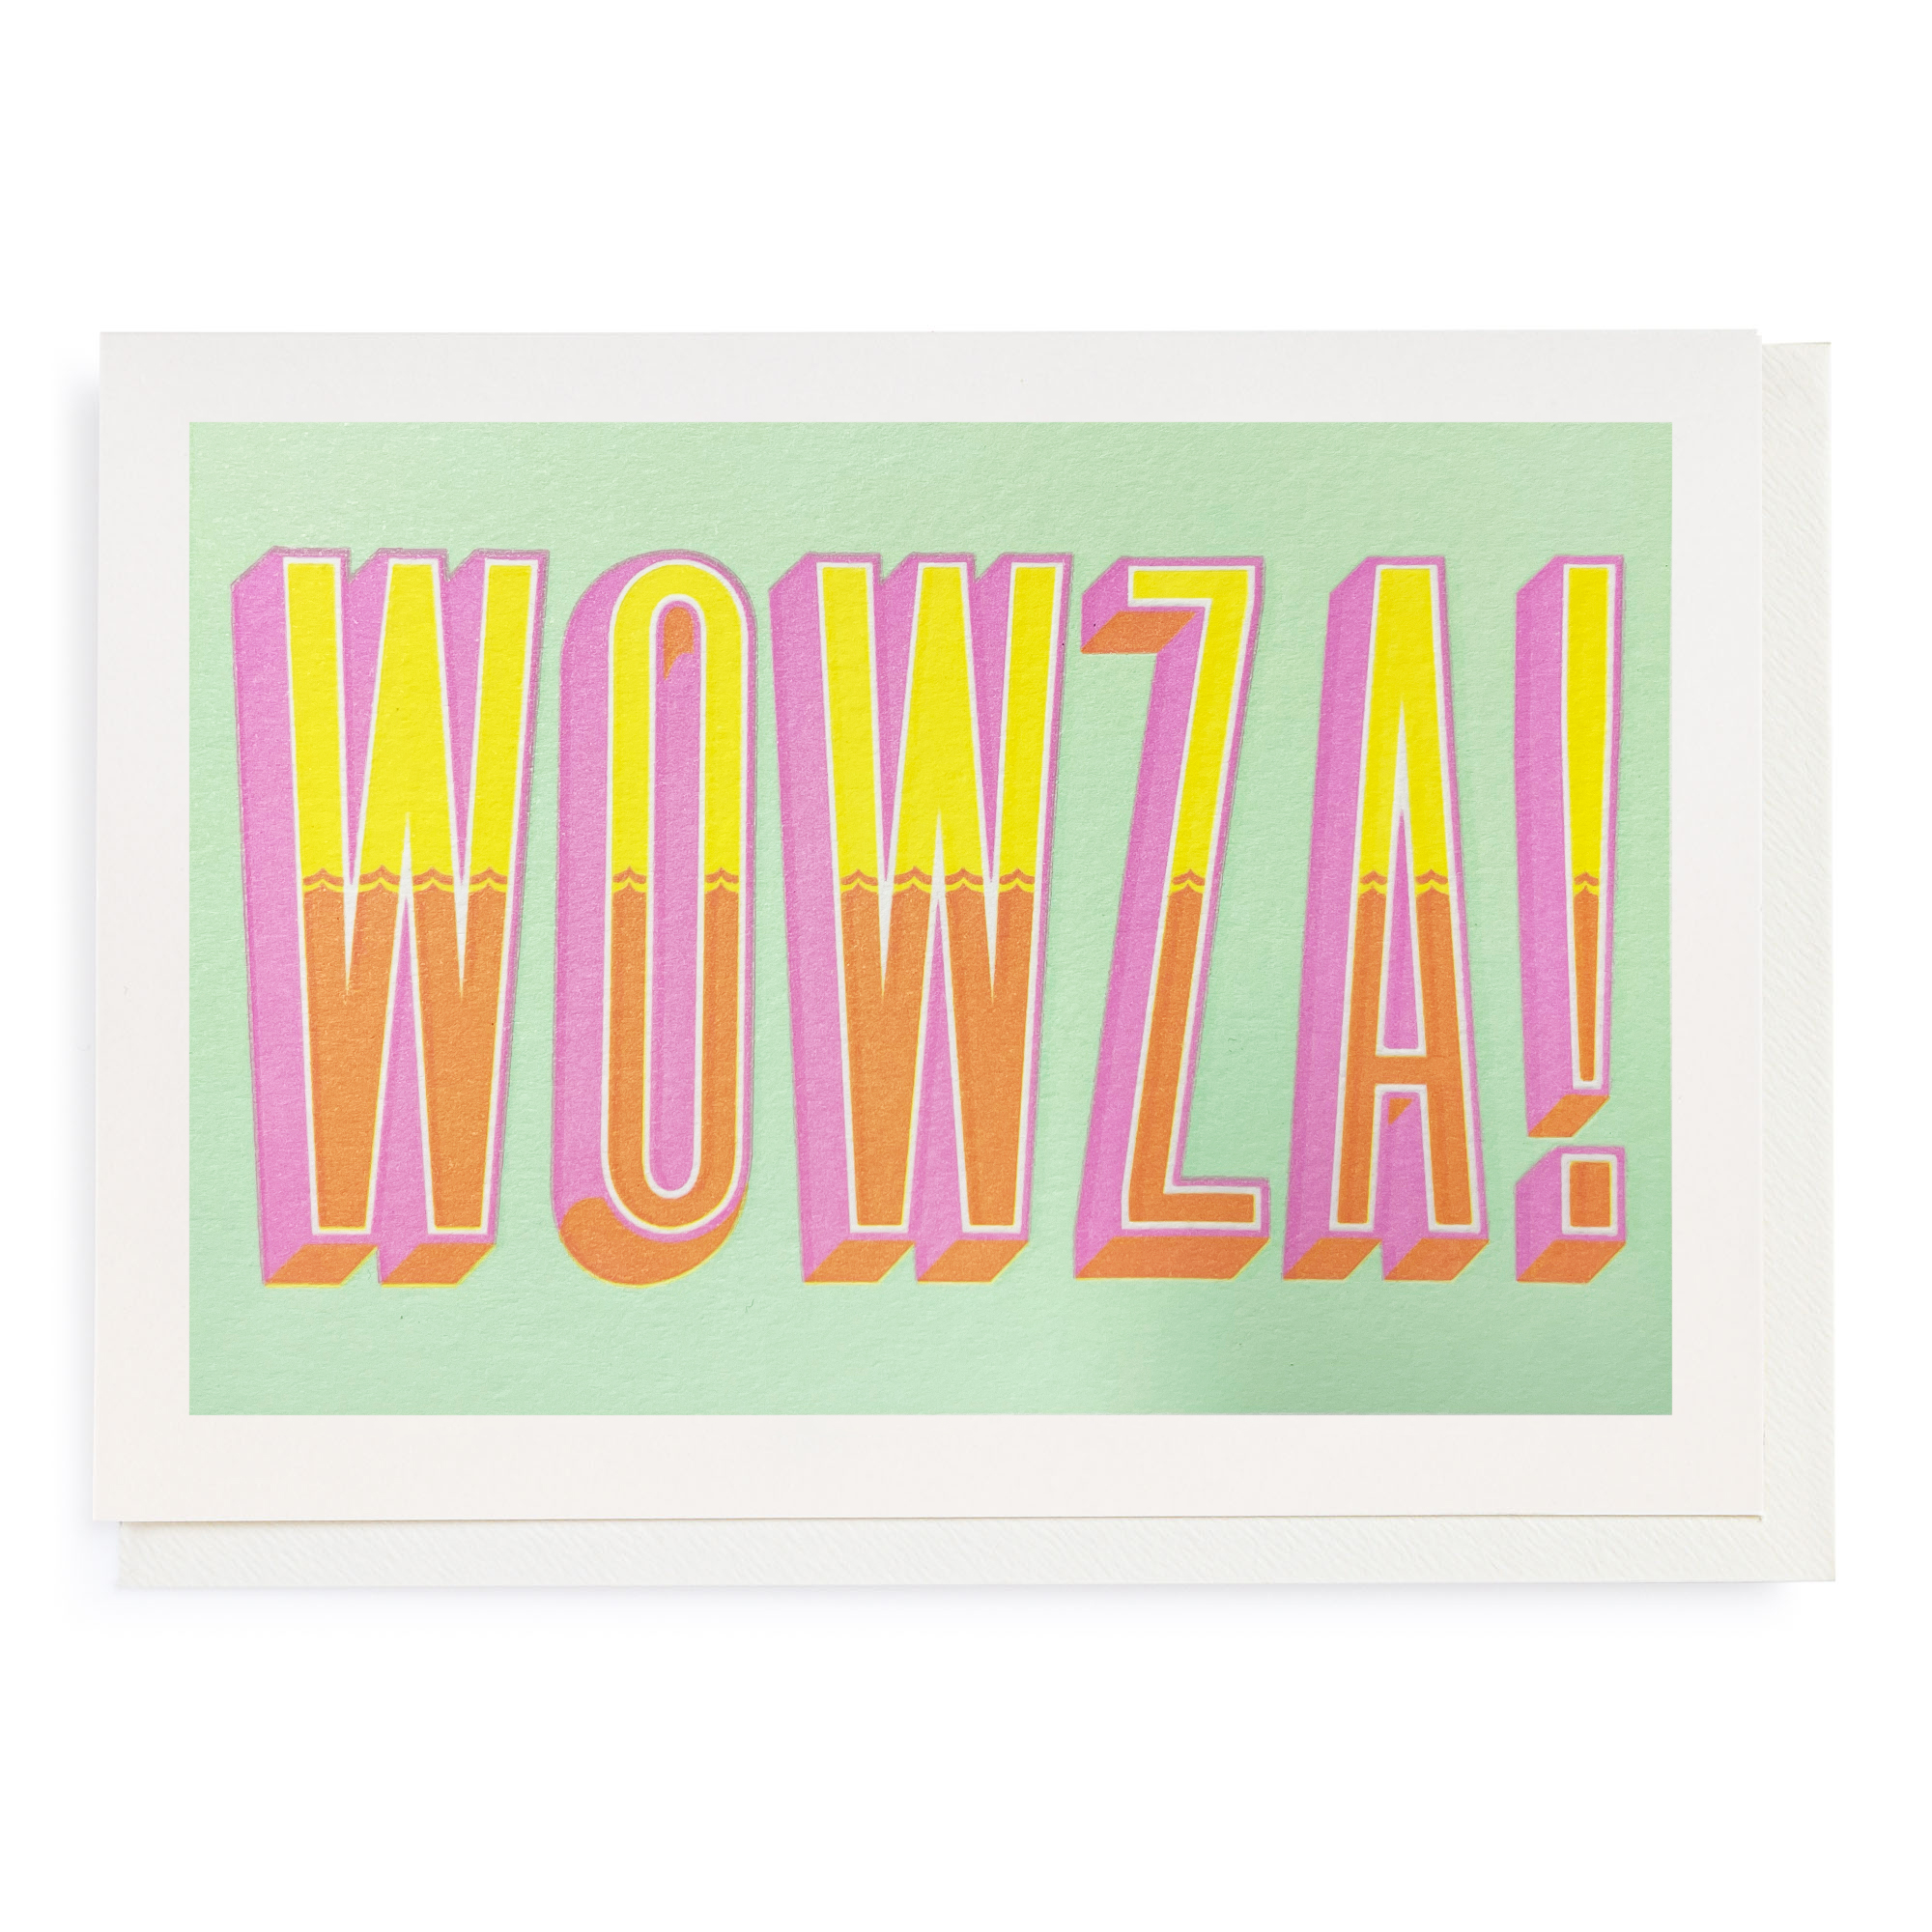 Wowza! - Letterpress Cards - Thomas Mayo - from Archivist Gallery 